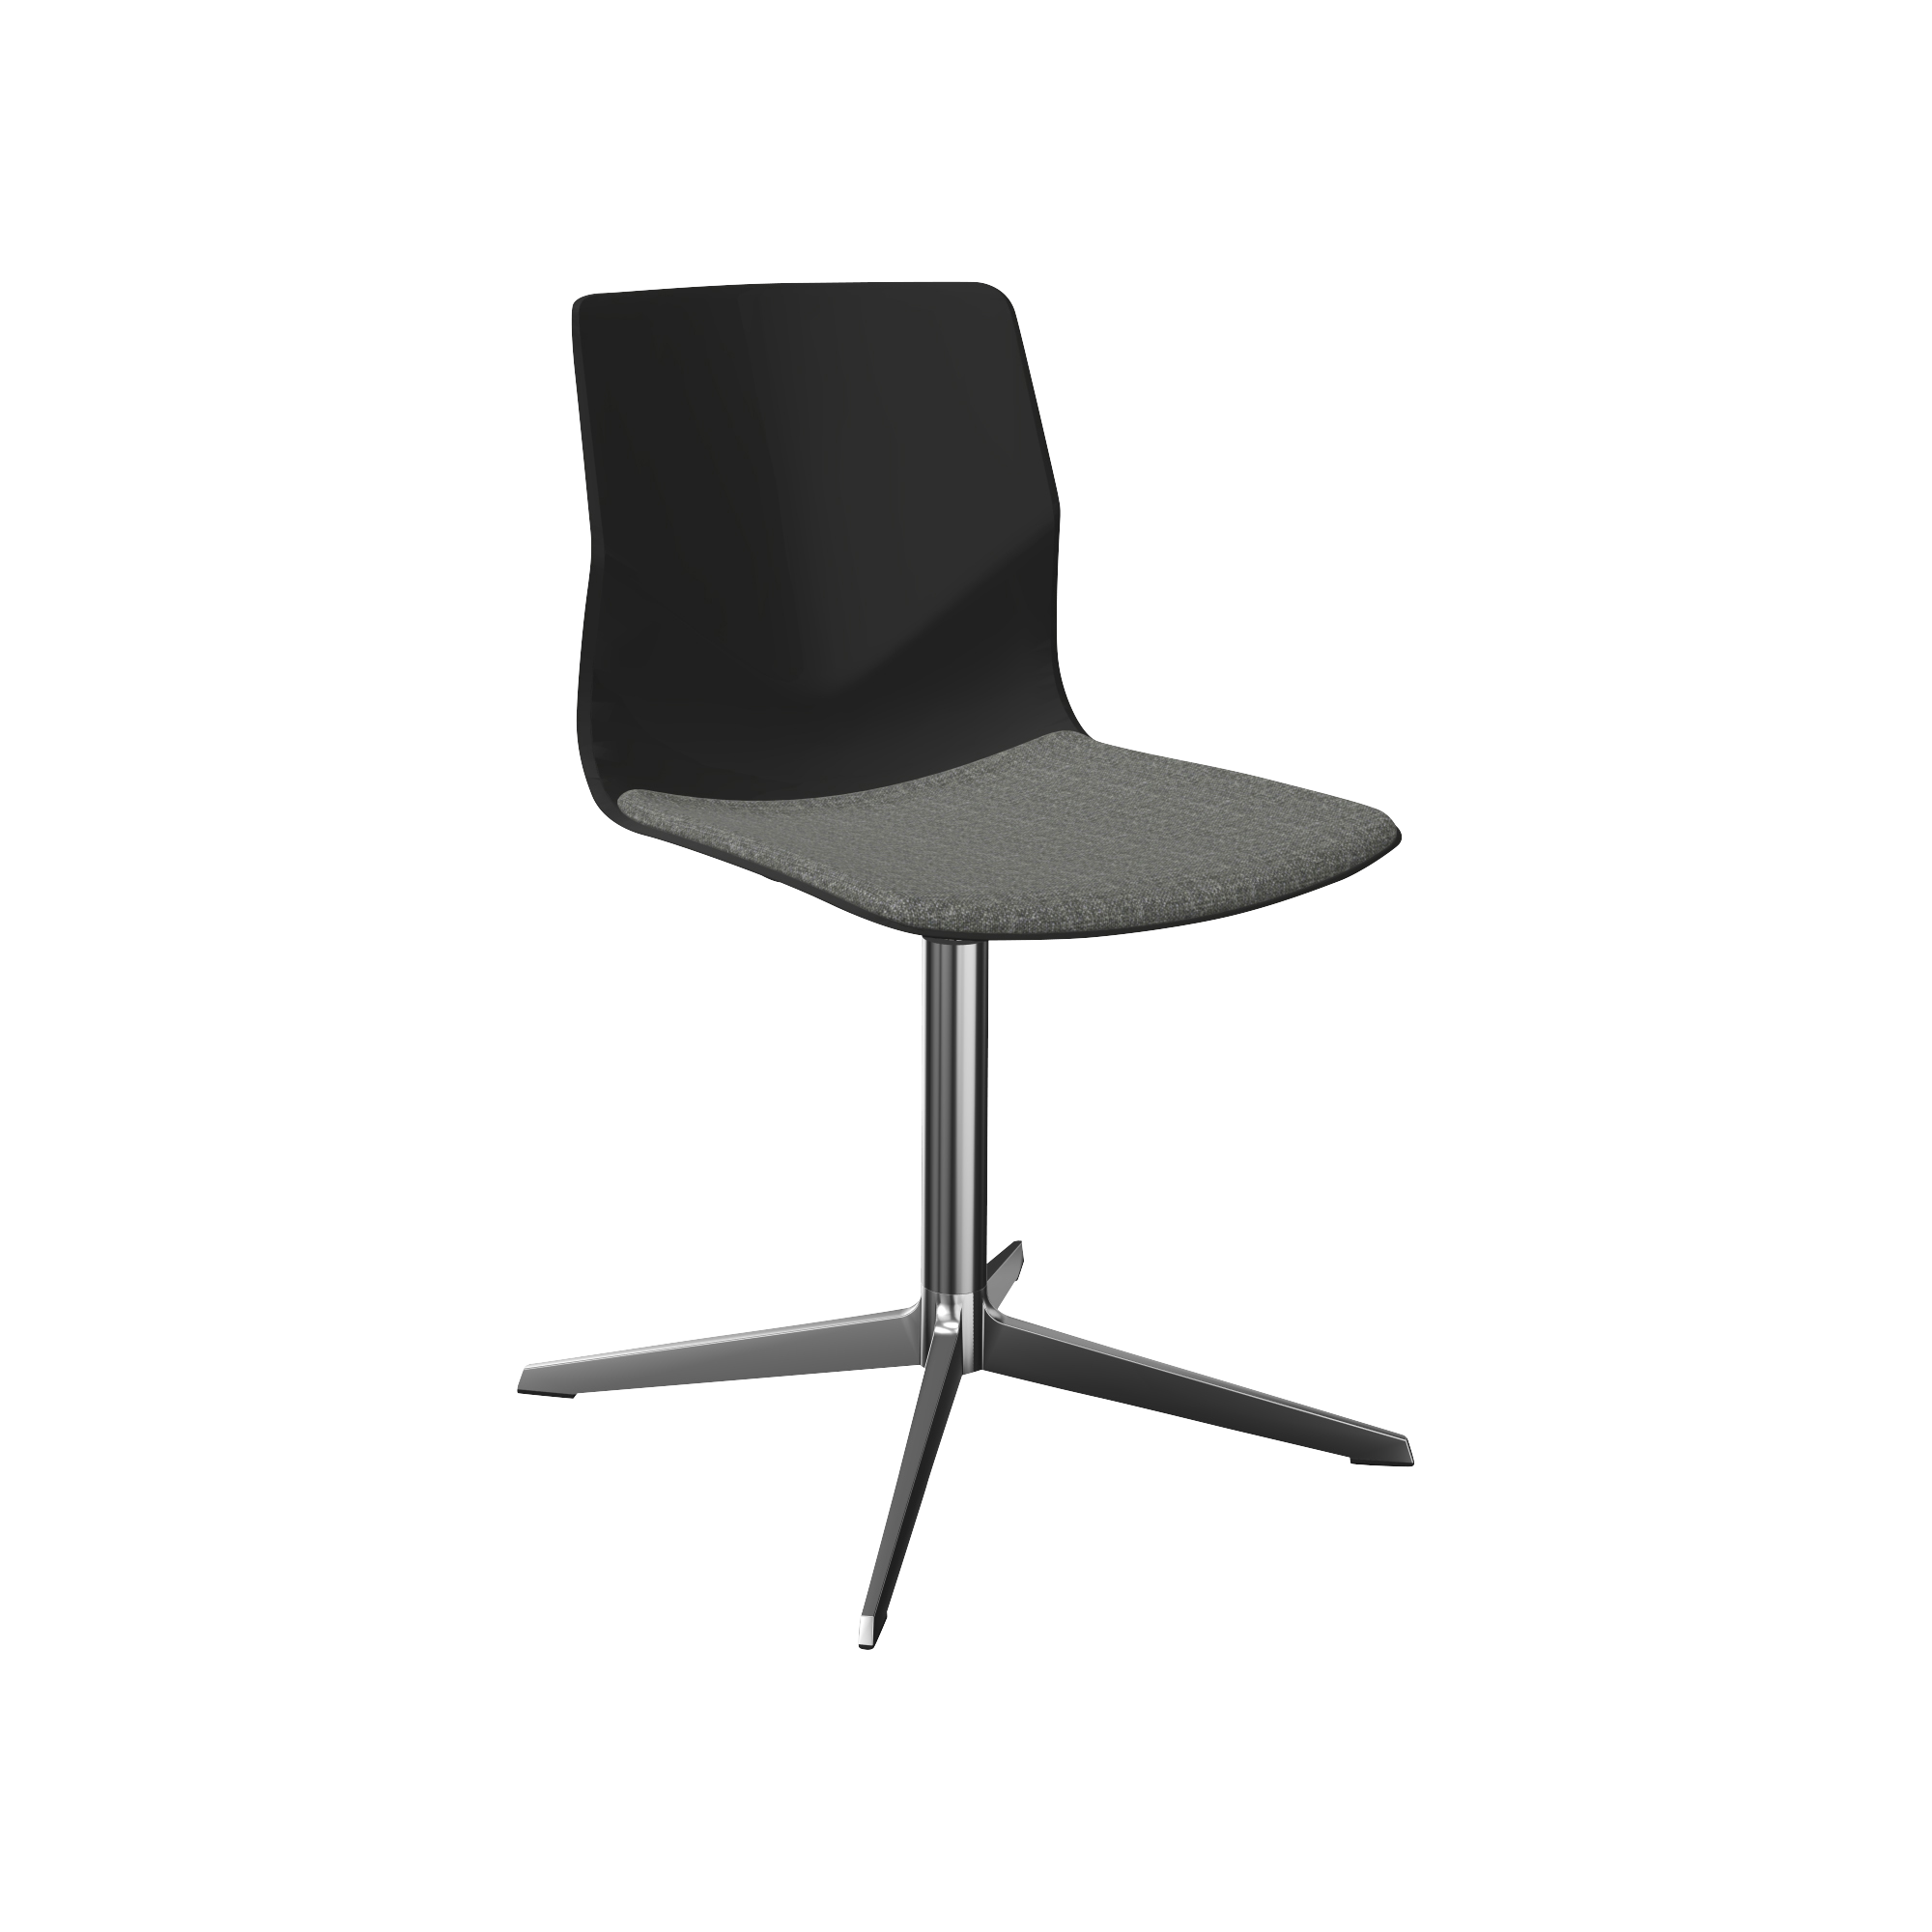 A black and grey office chair with a chrome pedestal leg